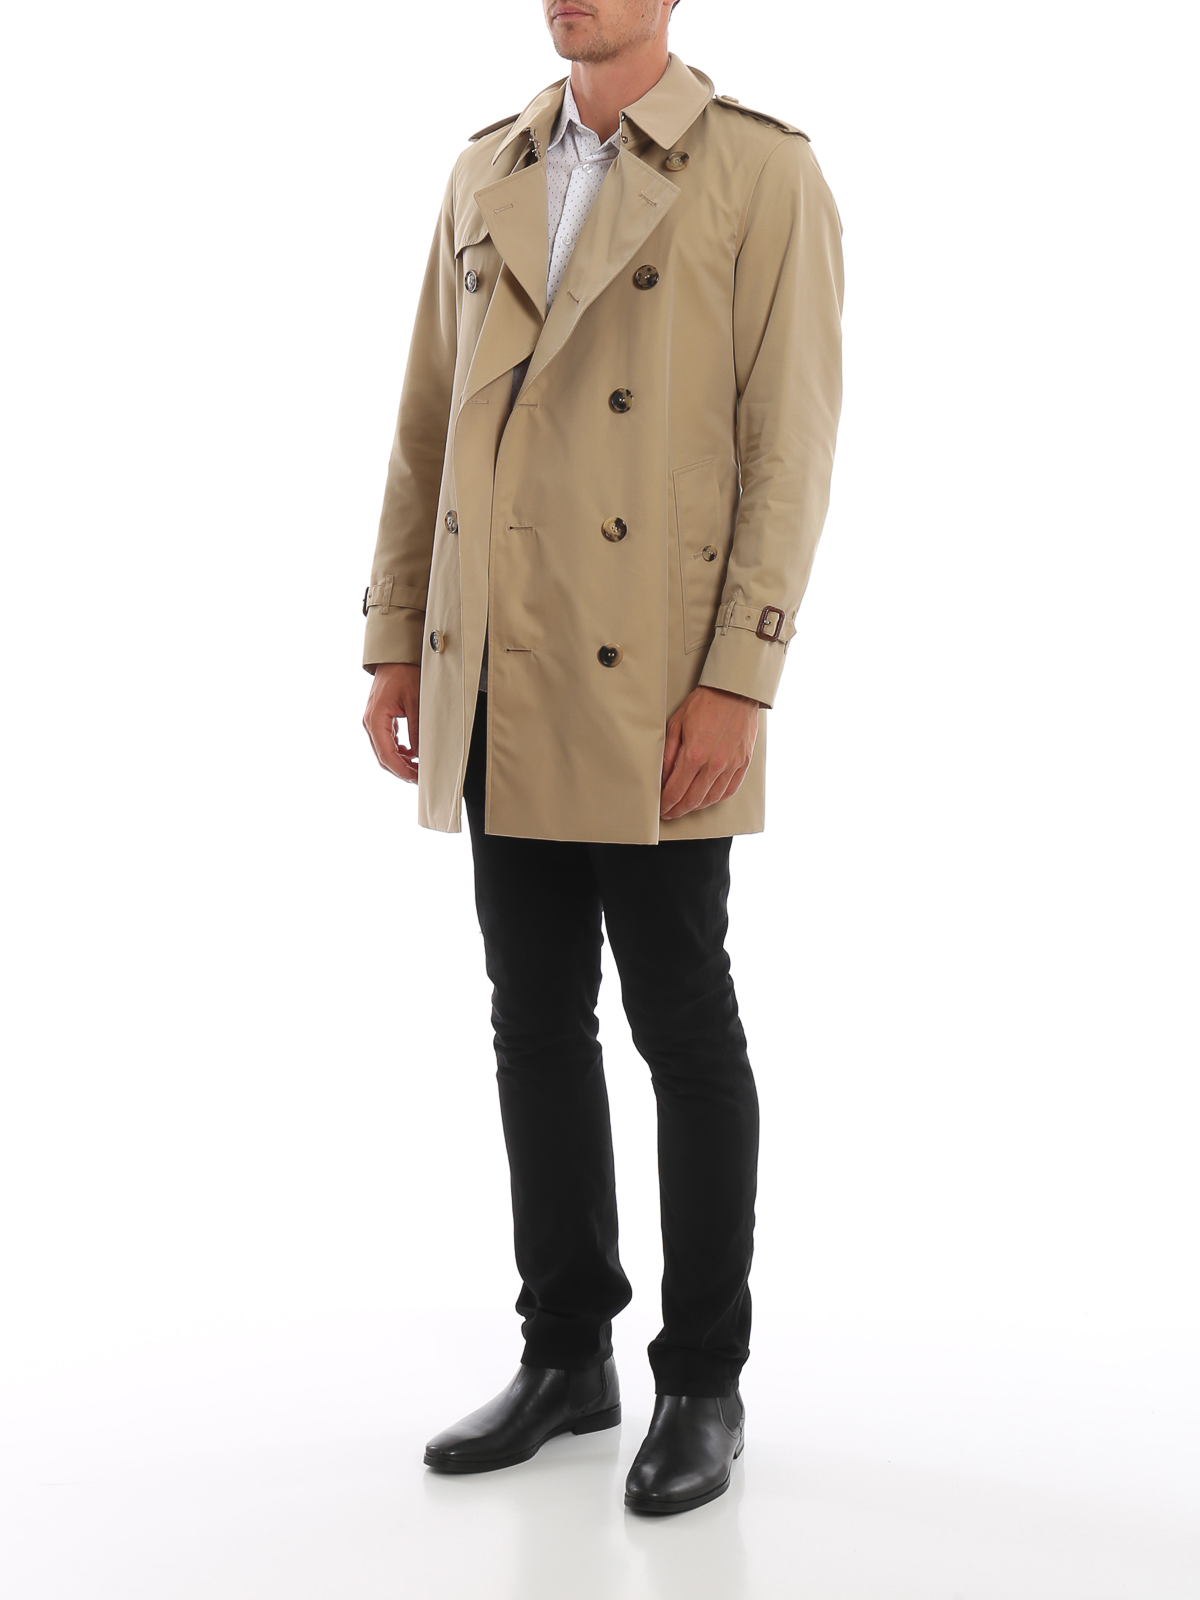 the burberry trench coat